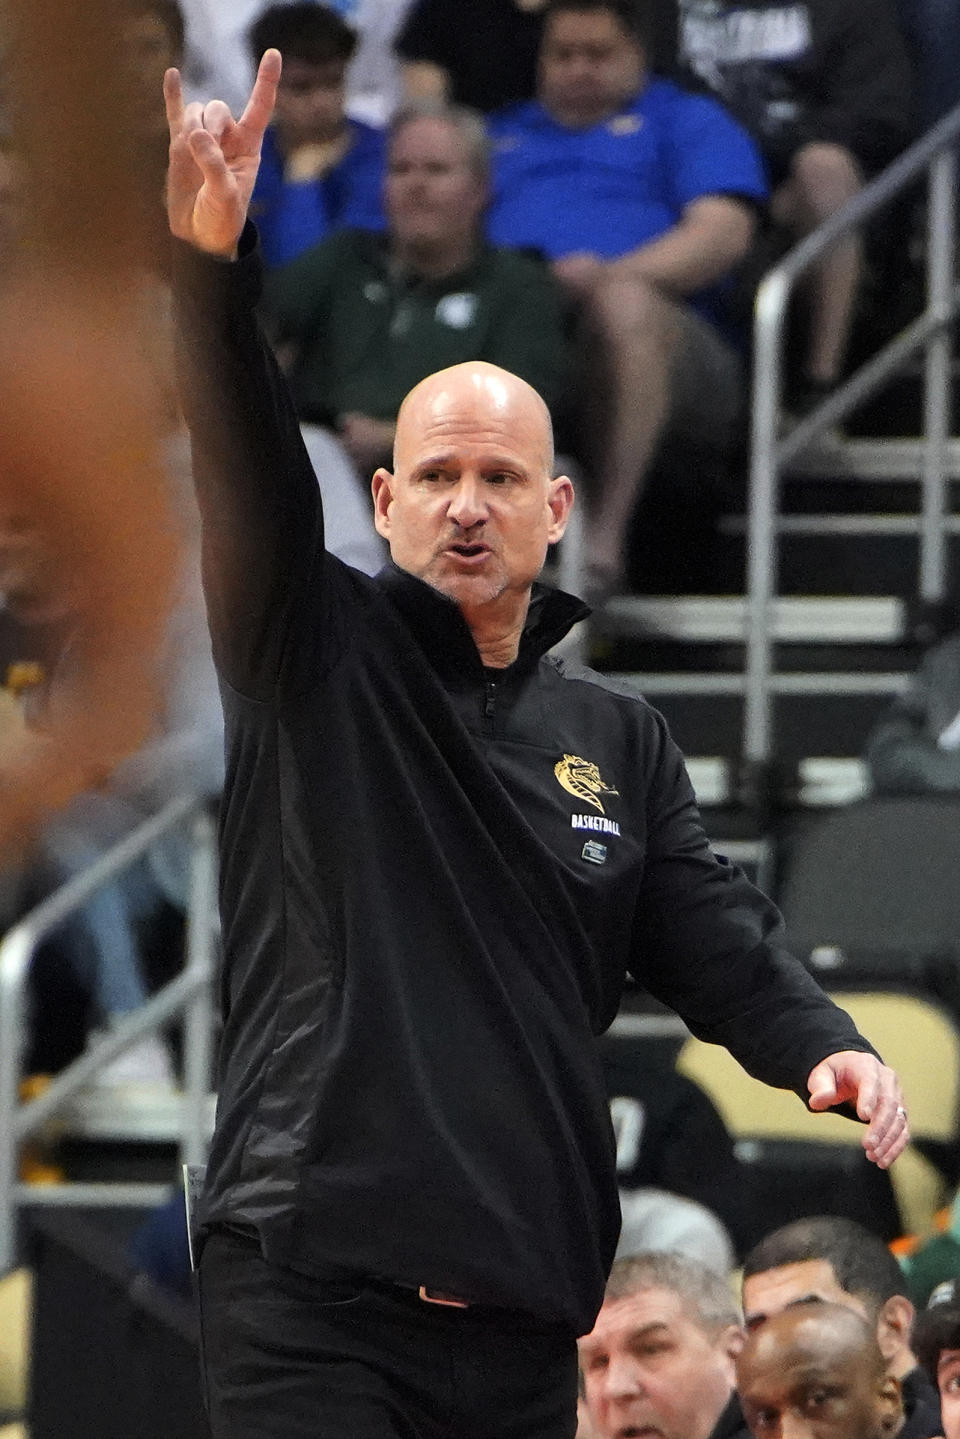 UAB head coach Andy Kennedy gives instructions during the first half of a college basketball game against Houston in the first round of the NCAA tournament in Pittsburgh, Friday, March 18, 2022. (AP Photo/Gene J. Puskar)